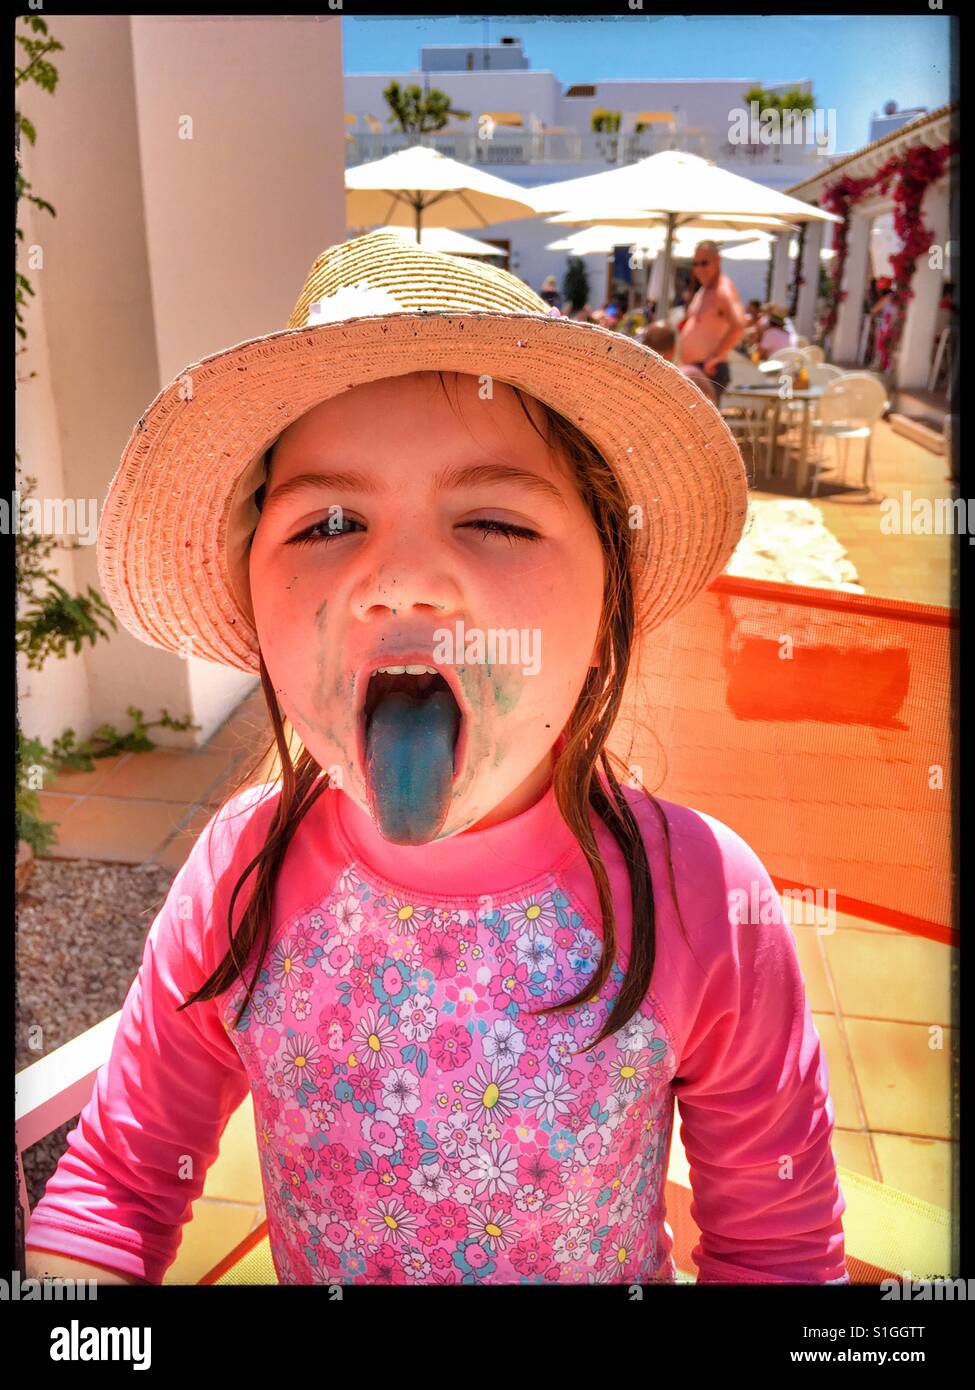 Girl with blue tongue after eating candy floss. Stock Photo